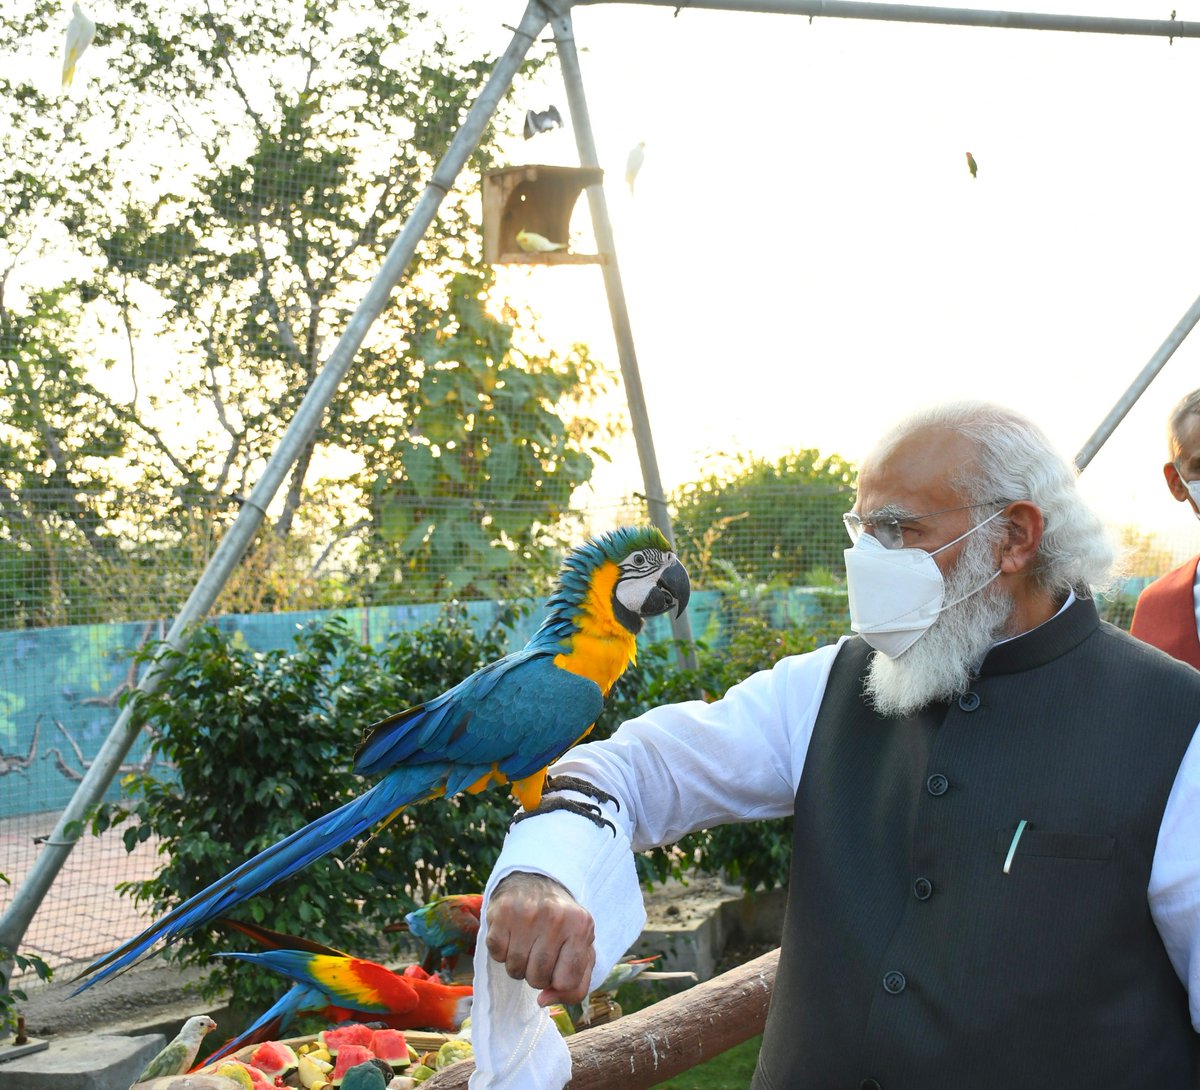 Kevadia is all set to turn into a birdwatcher’s delight. Inaugurated a state-of-the-art aviary, which is a must visit!